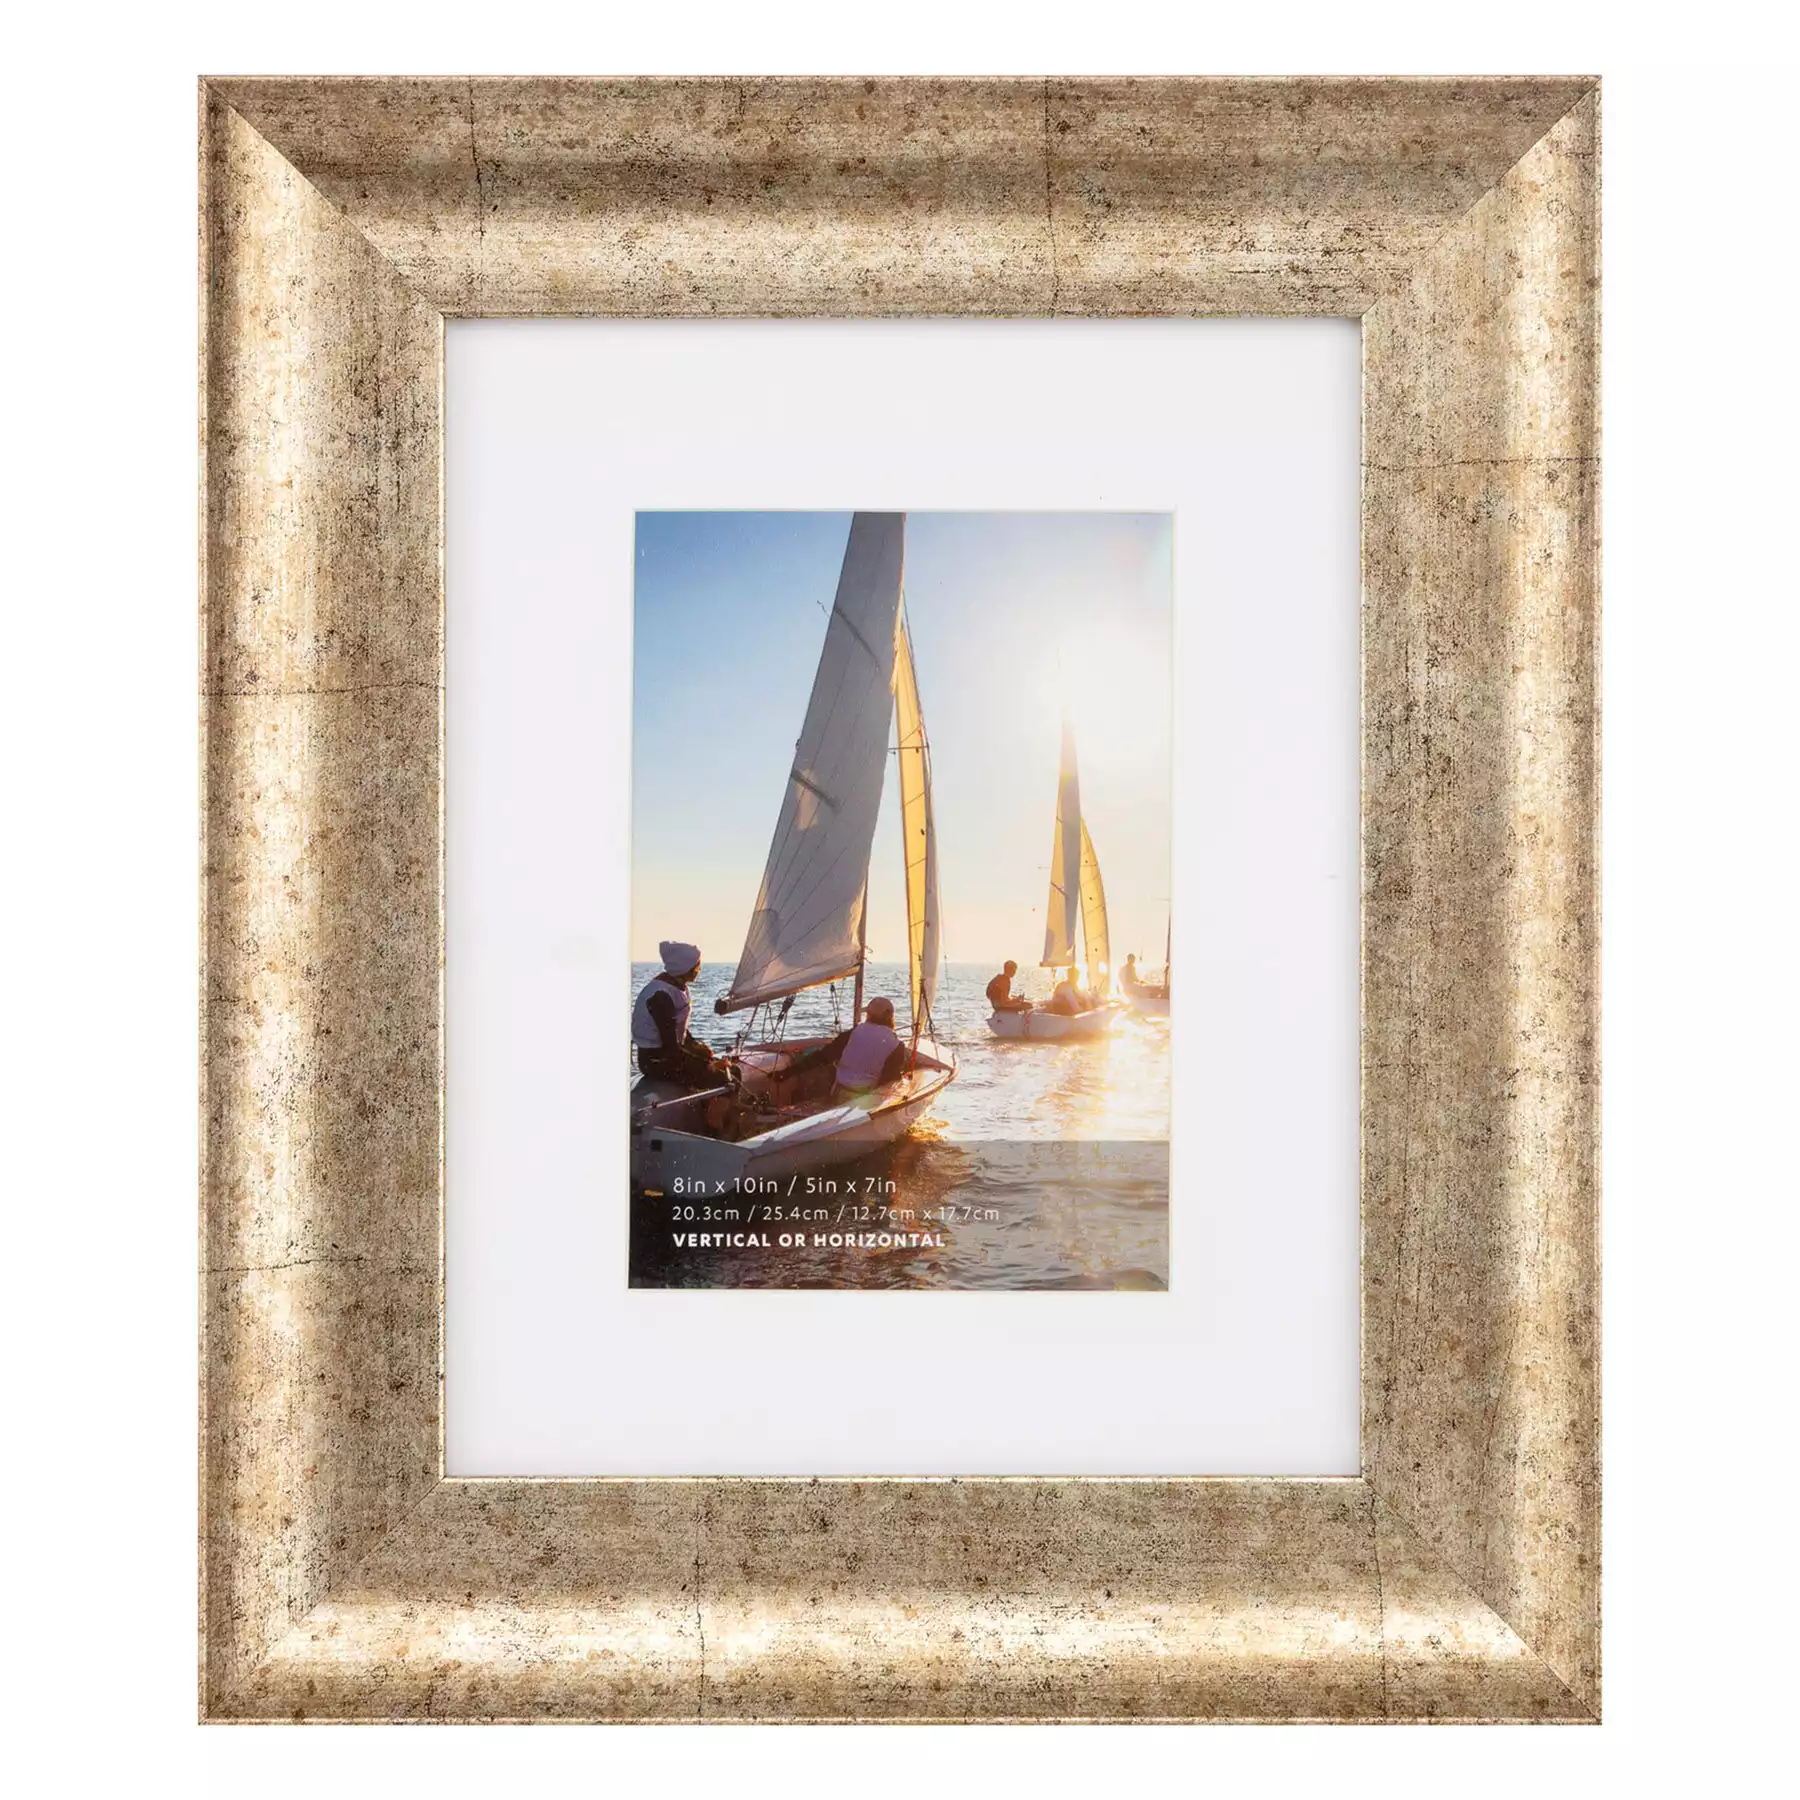 Luxurious All the people Gift Selection 8X10 Matted To 5X7 champagne Scoop  Profile White Mat Photo Frame at a Steal